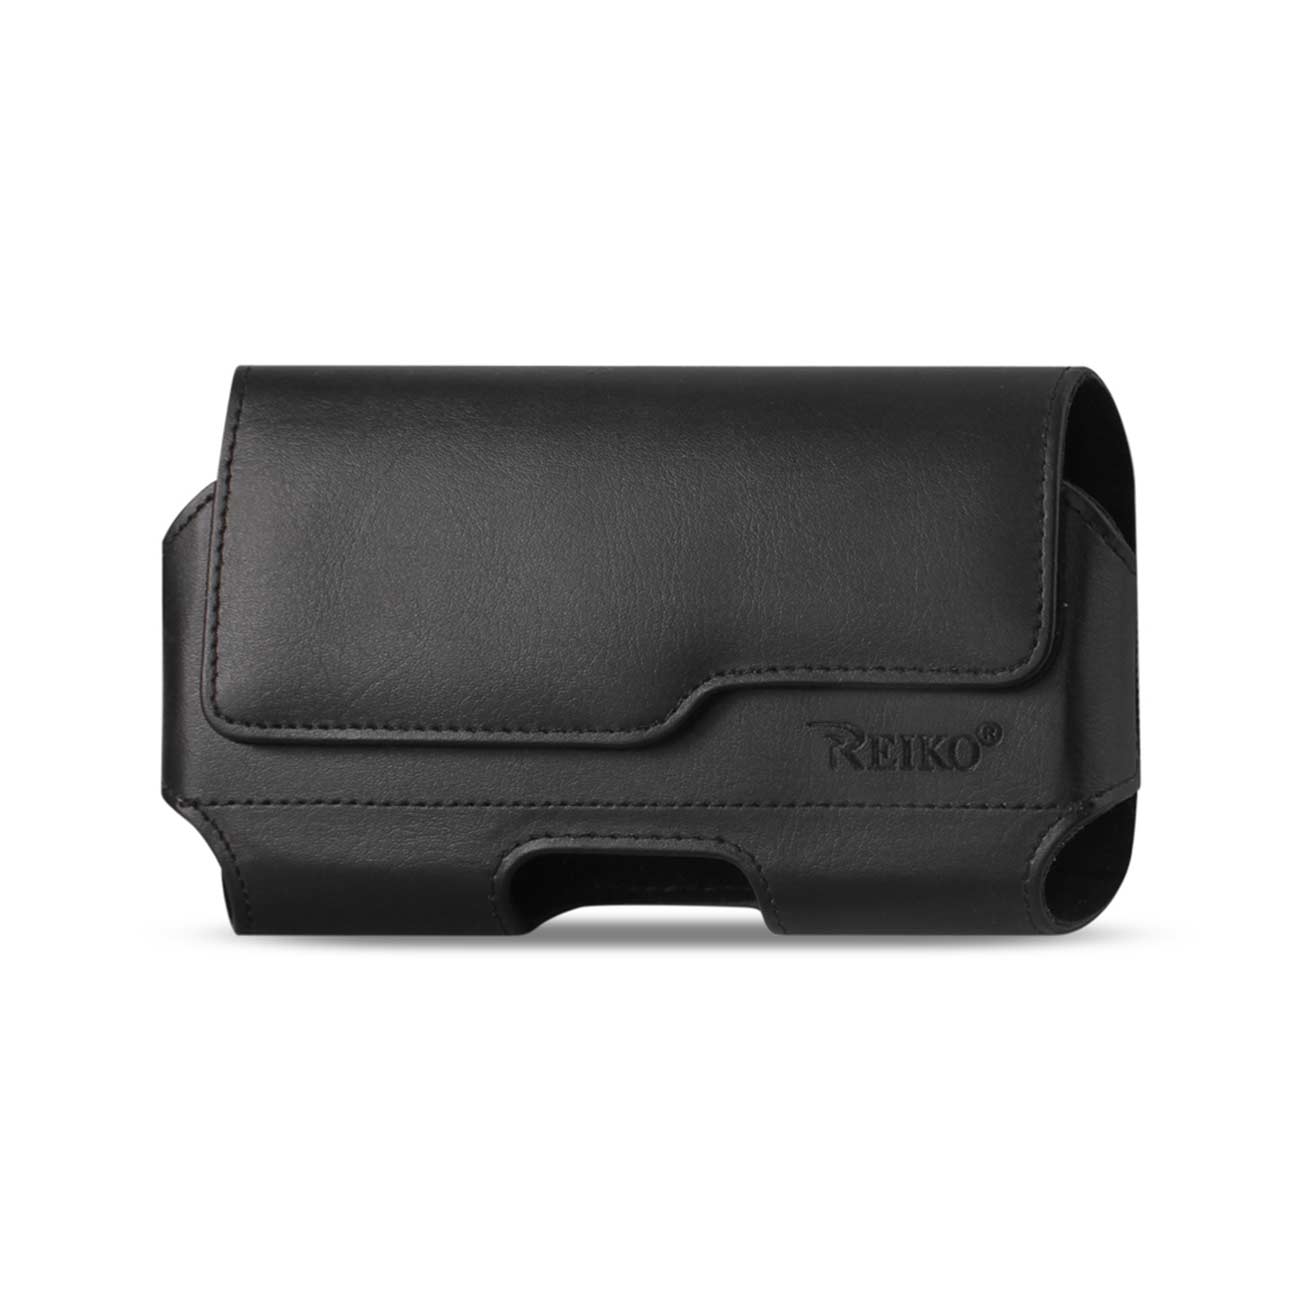 Pouch/ Phone Holster Leather Horizontal With Z Lid Pattern Black Color